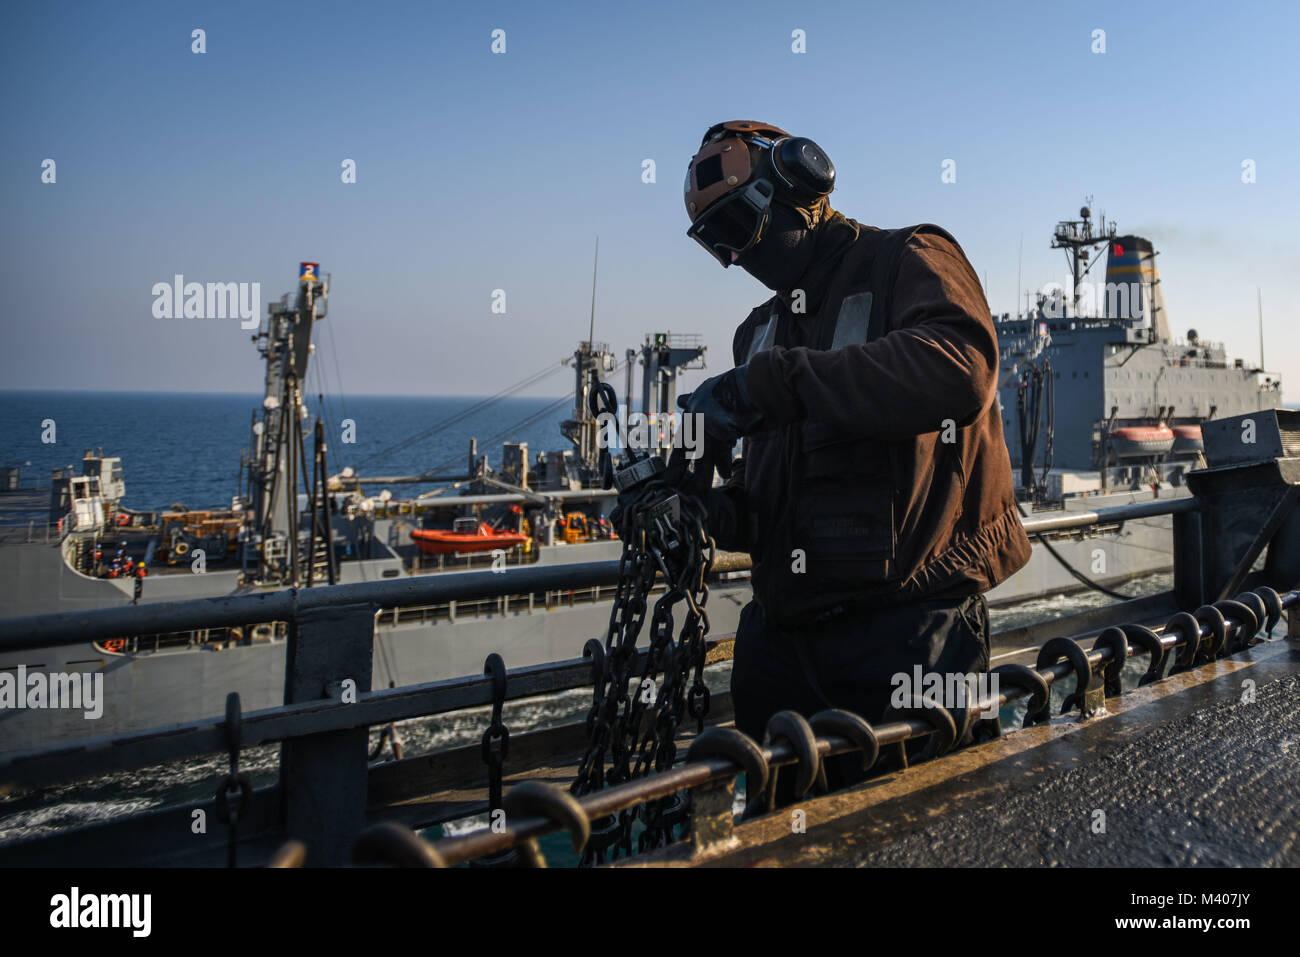 180208-N-VN584-1449 ARABIAN GULF (Feb. 8, 2018) Aviation Ordnanceman Airman Jake Medill, assigned to the Cougars of Electronic Attack Squadron (VAQ) 139, stows chains on the flight deck of the aircraft carrier USS Theodore Roosevelt (CVN 71) during a replenishment-at-sea with the fleet replenishment oiler USNS Guadalupe (T-AO-200). Theodore Roosevelt and its carrier strike group are deployed to the U.S. 5th Fleet area of operations in support of maritime security operations to reassure allies and partners and preserve the freedom of navigation and the free flow of commerce in the region. (U.S. Stock Photo